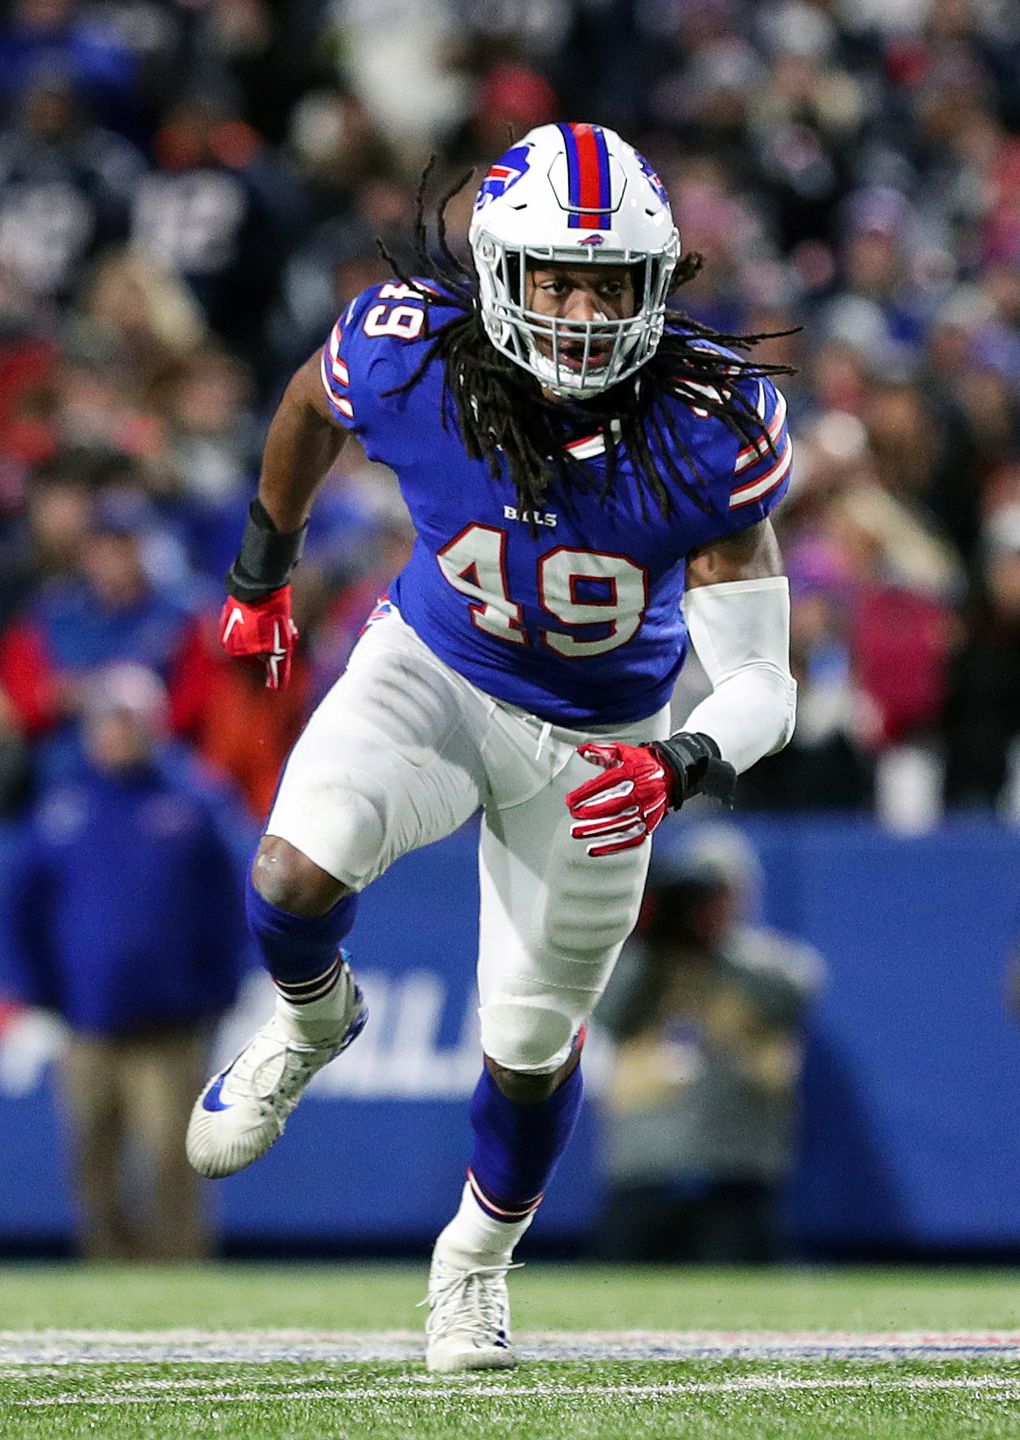 How old is Tremaine Edmunds? The Bills' NFL draft pick is 19 